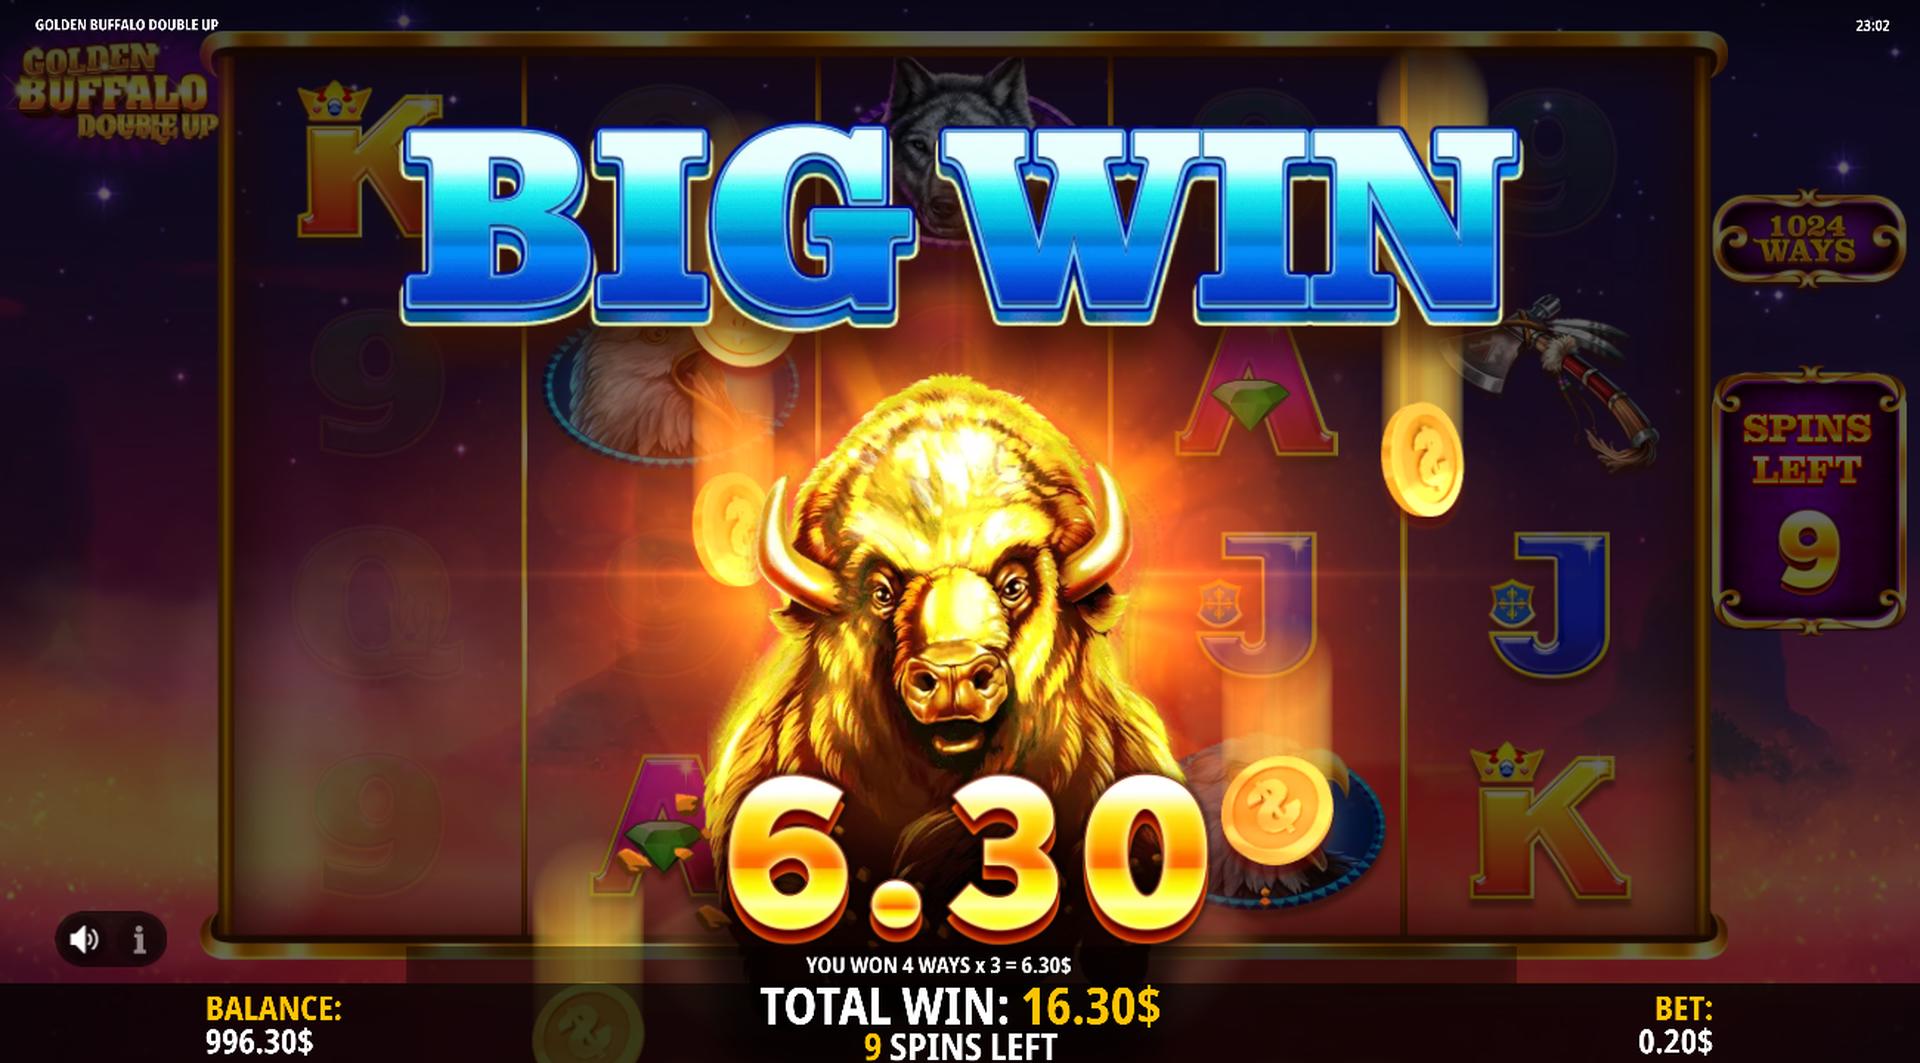 Can you win at the Golden Buffalo Double Up slot?